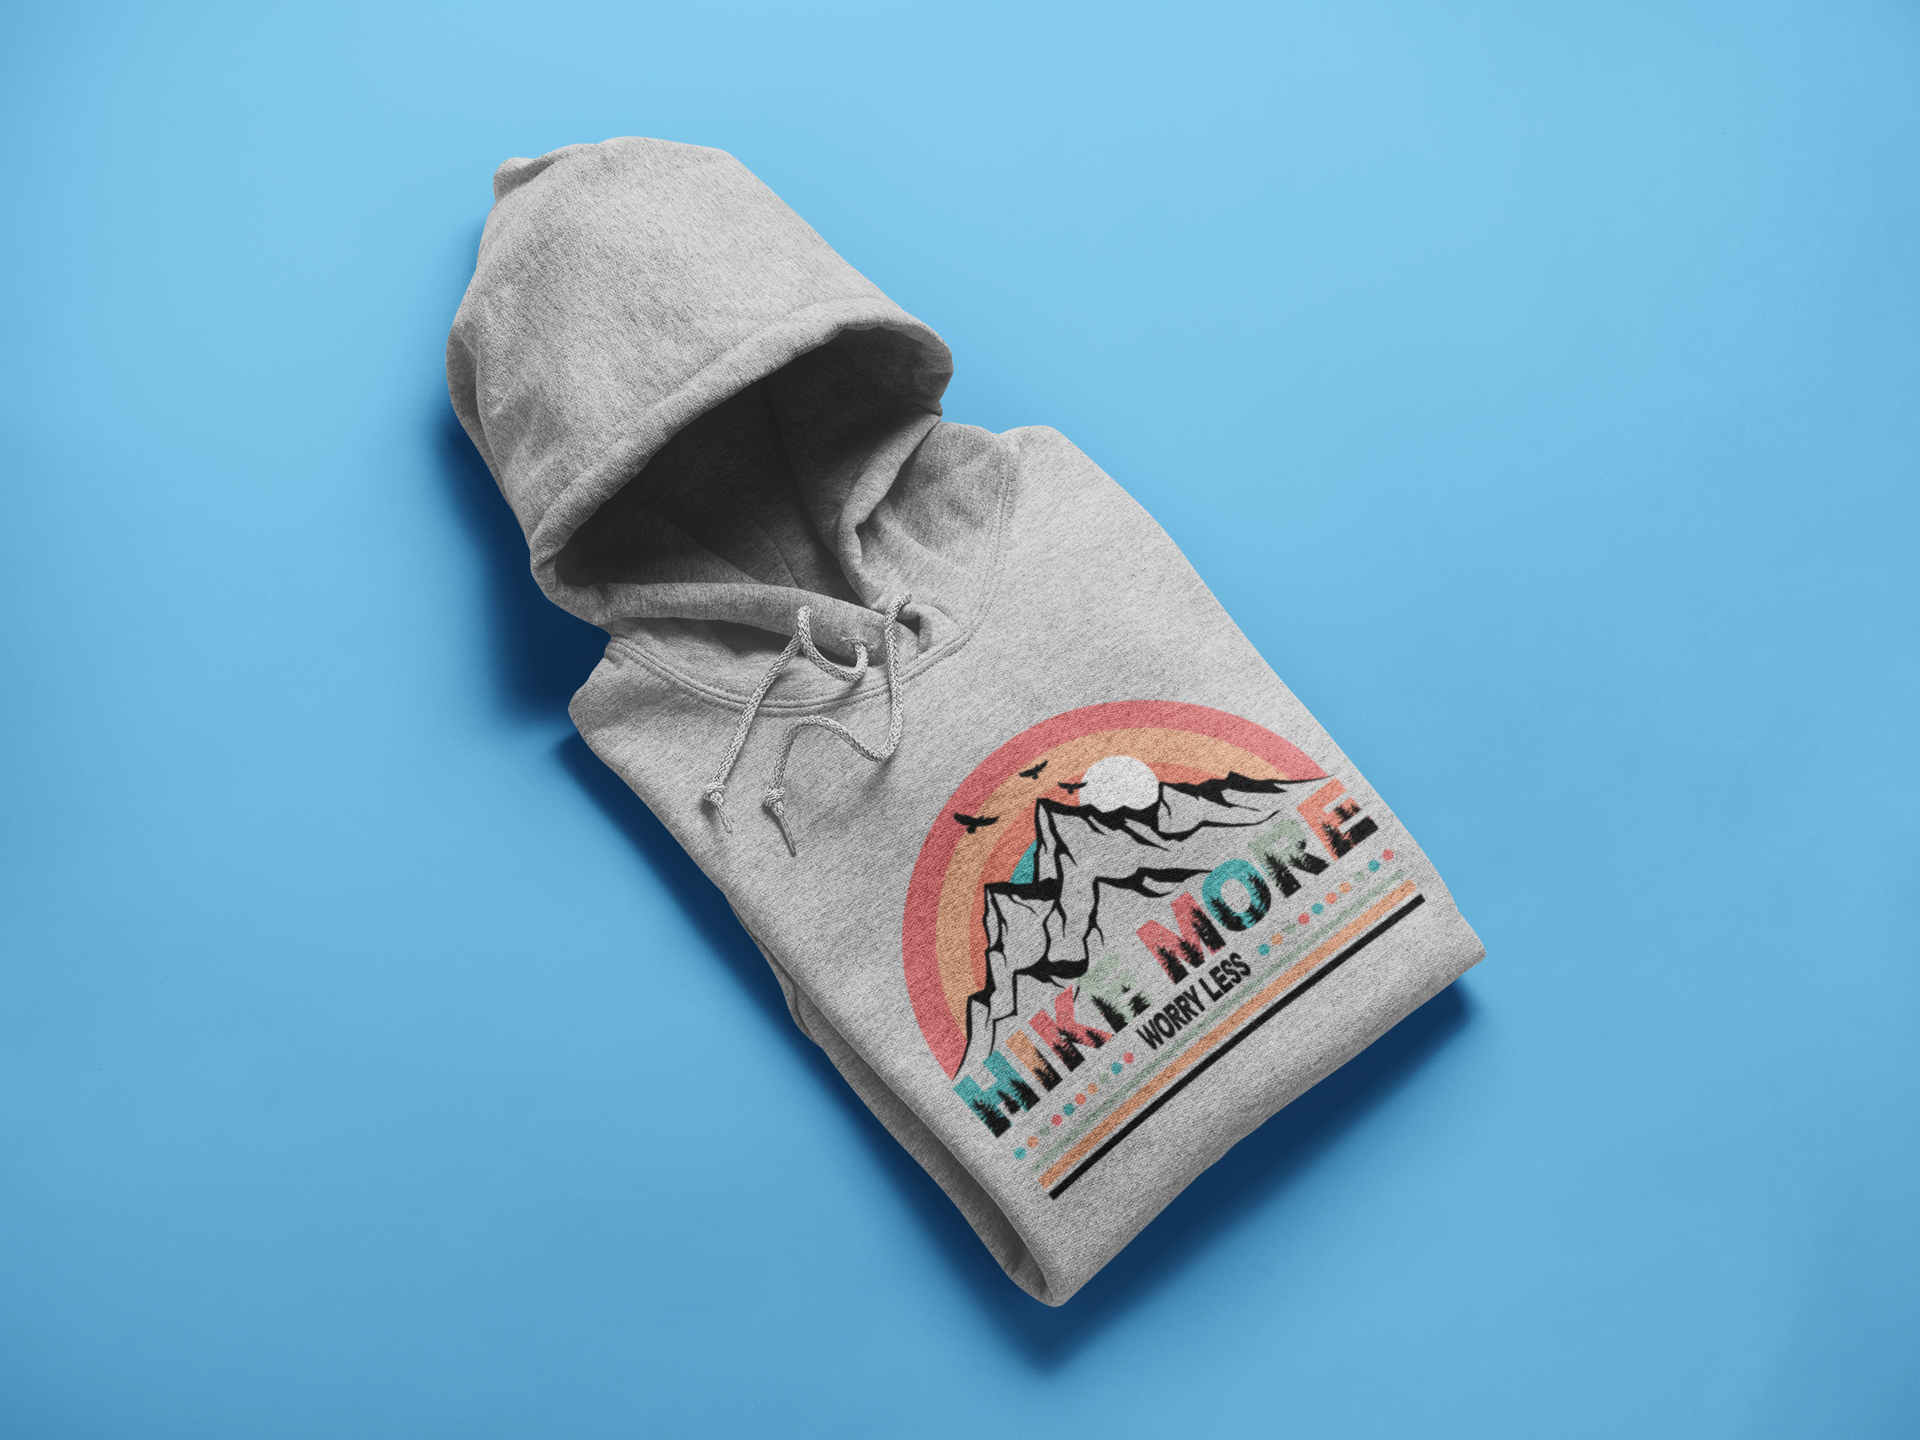 HIKE MORE WORRY LESS SOFT STYLE HOODIE